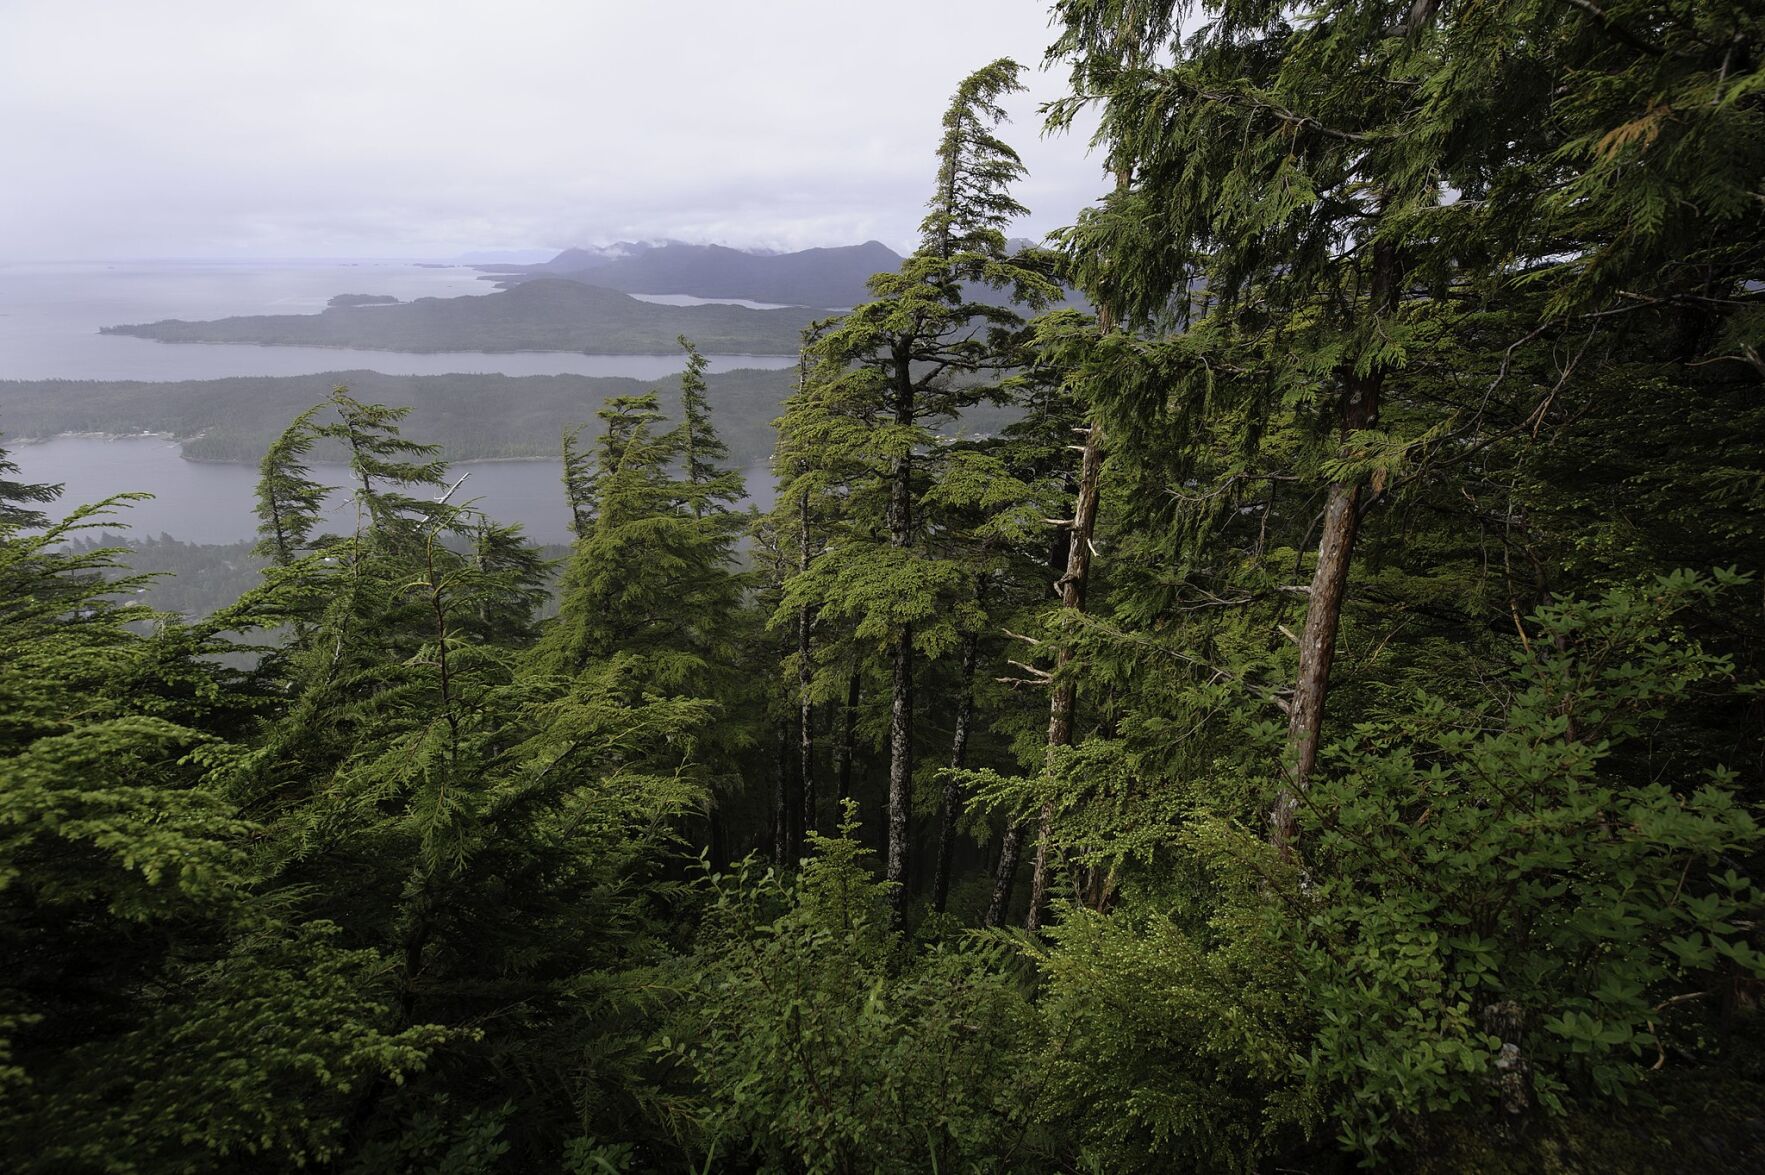 Biden ends large-scale logging in Tongass National Forest | News 